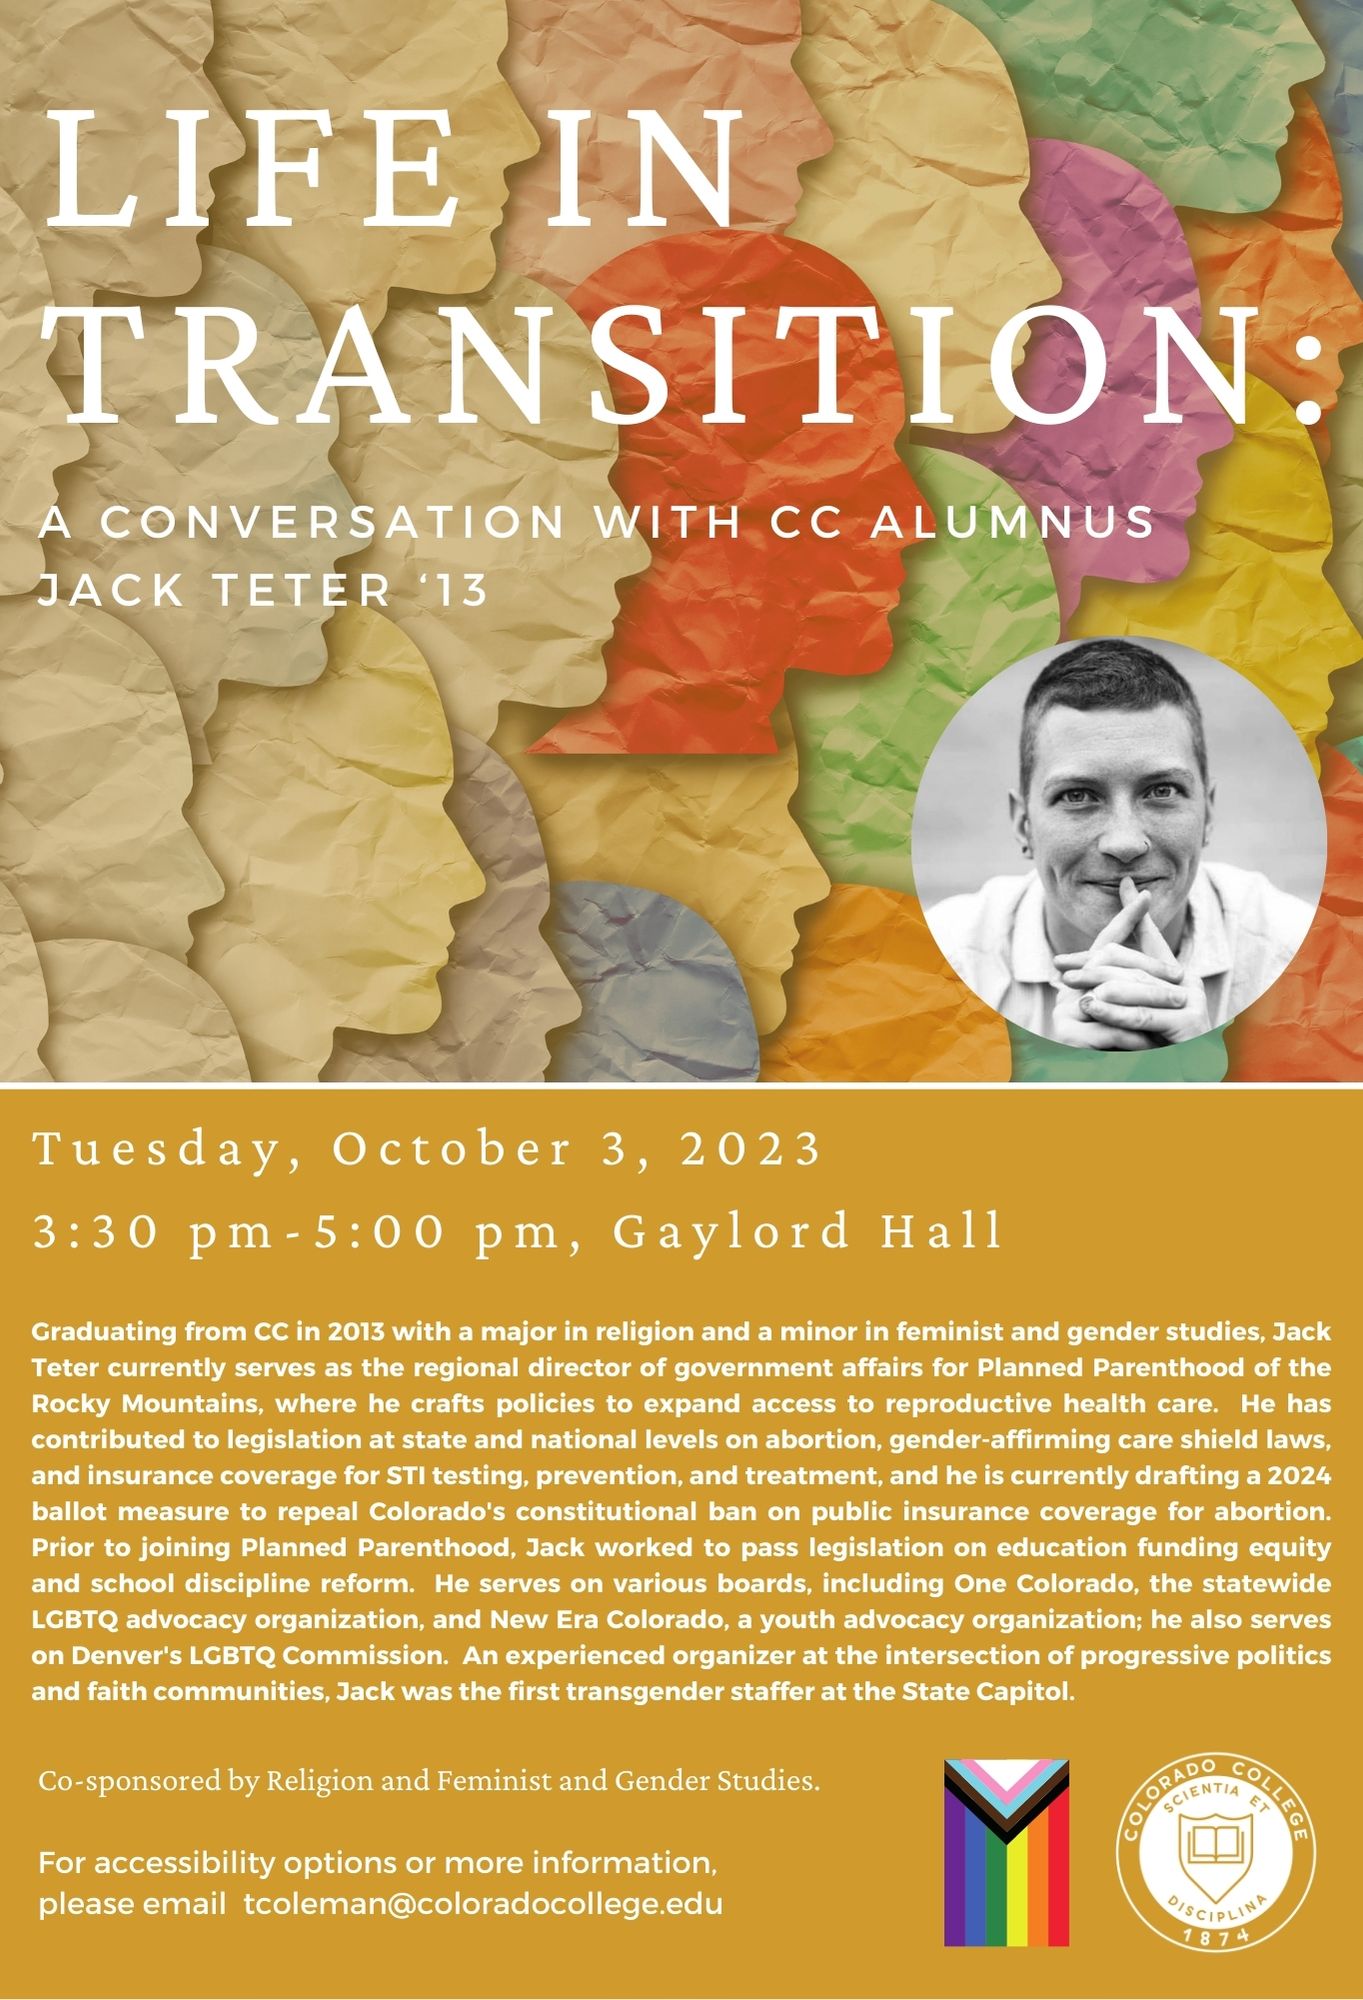 Life in Transition: A Conversation with CC Alumnus Jack Teter '13